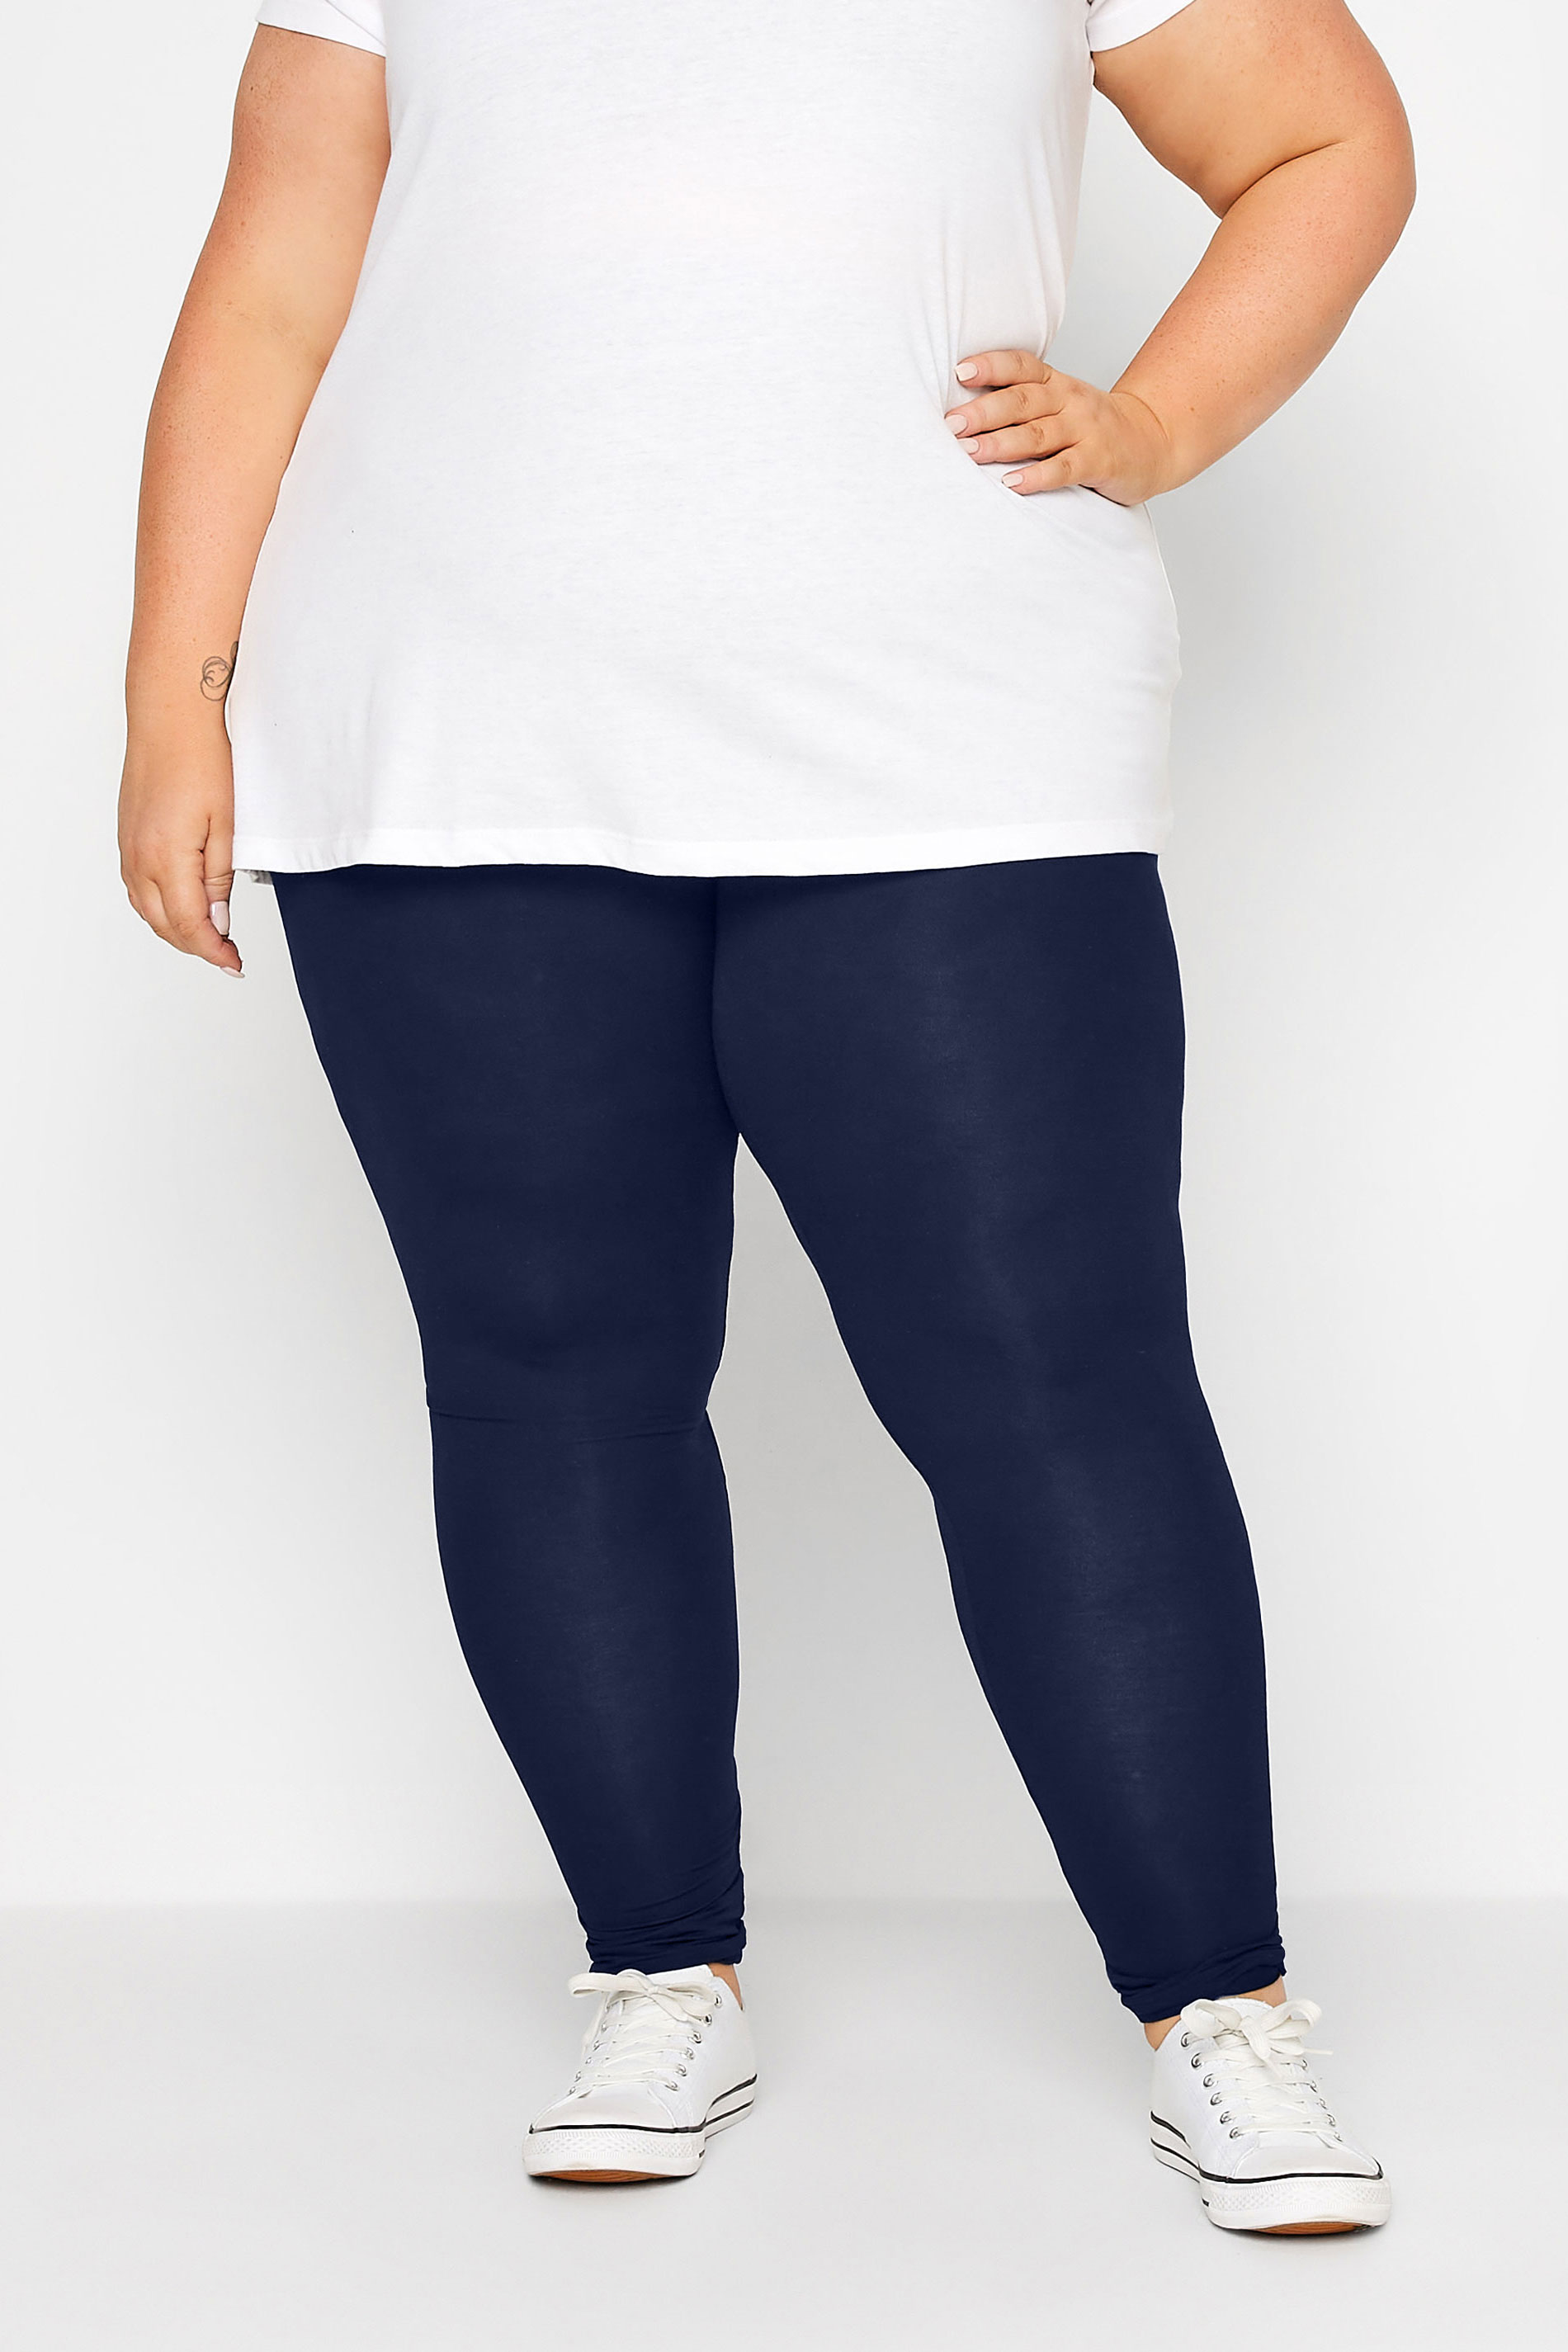 Extra High-Waisted PowerChill 7/8 Leggings | Old Navy